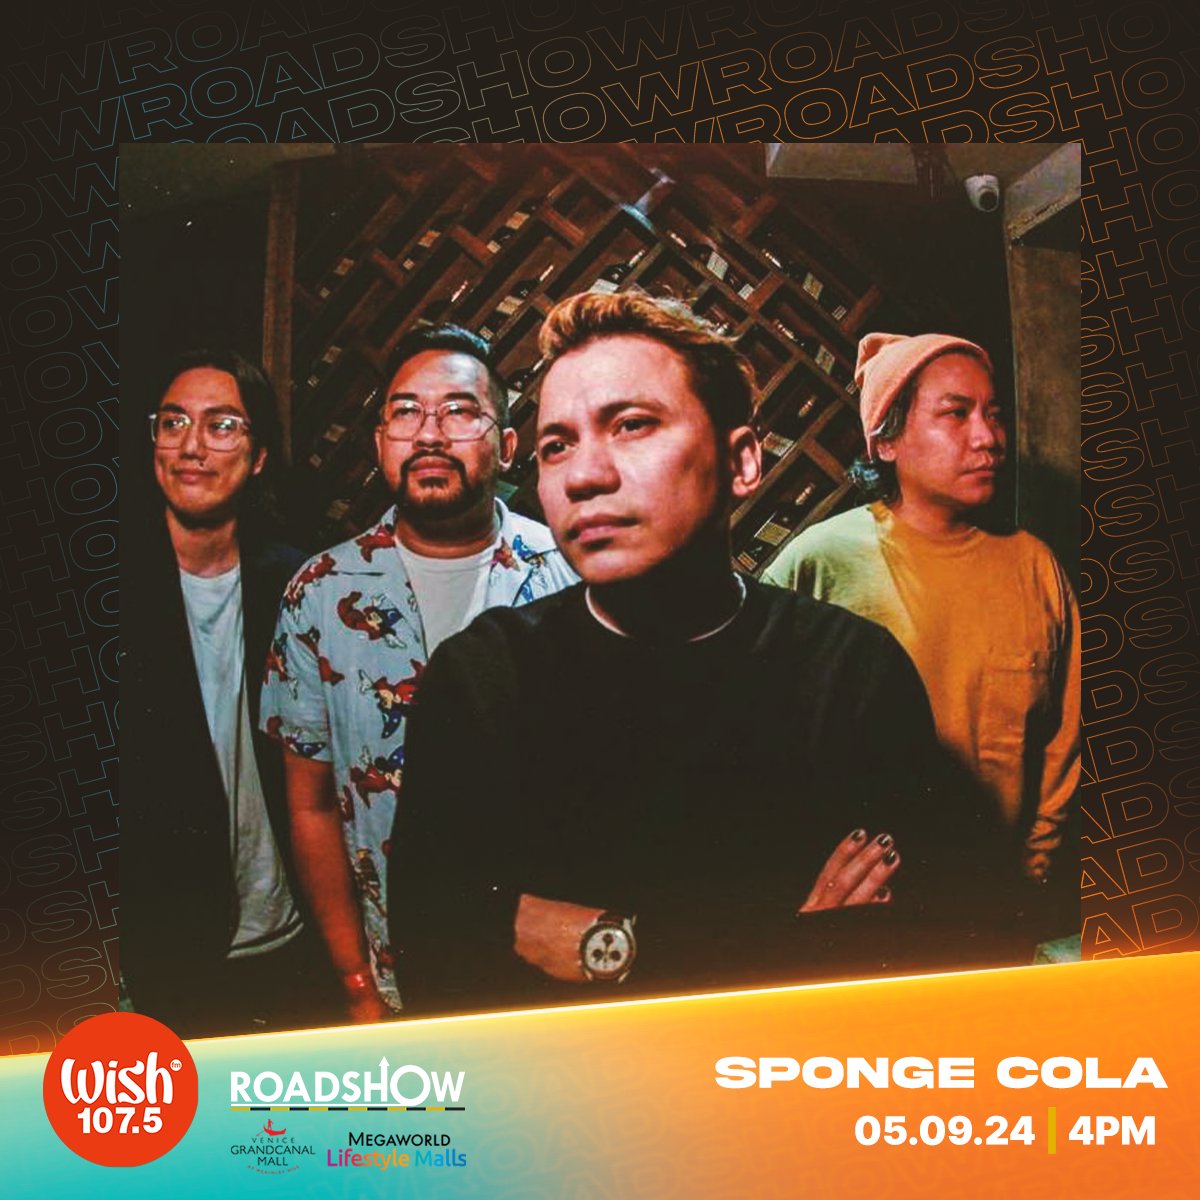 Catch the Wish Bus comeback of American singer-songwriter @lauvsongs and OPM rock band @SpongeColaPH on today's Roadshow! We will be at Venice Piazza, Venice Grand Canal in Taguig City.